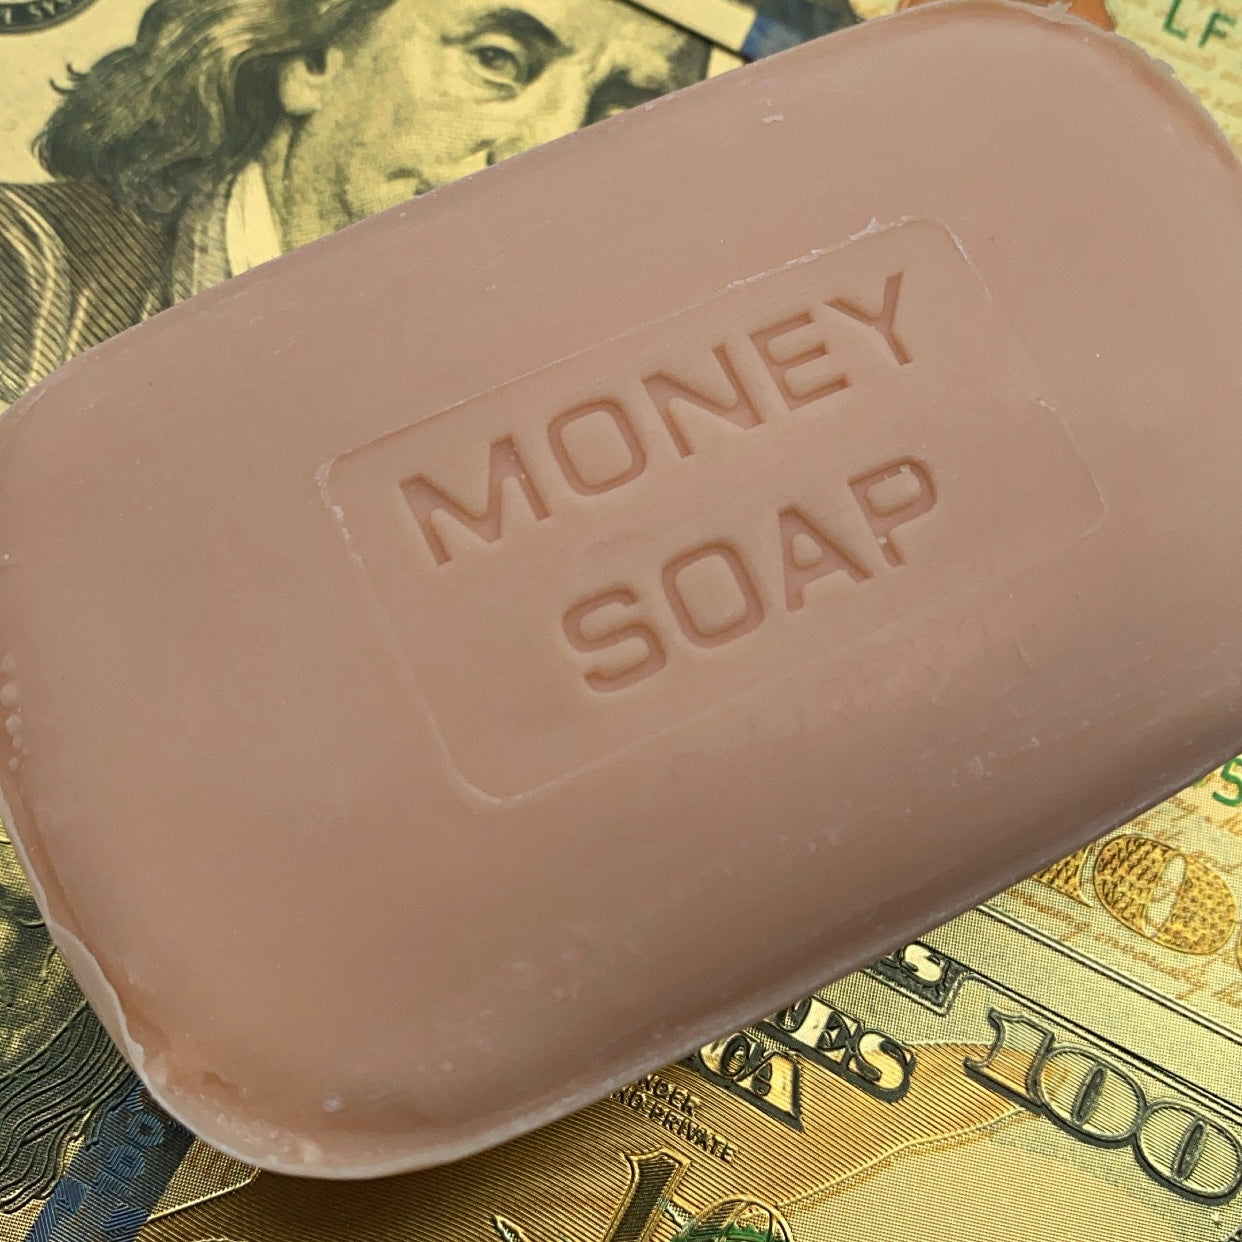 Set of 4 Money Soaps Jackpot Cash in Every Bar Best Seller as 